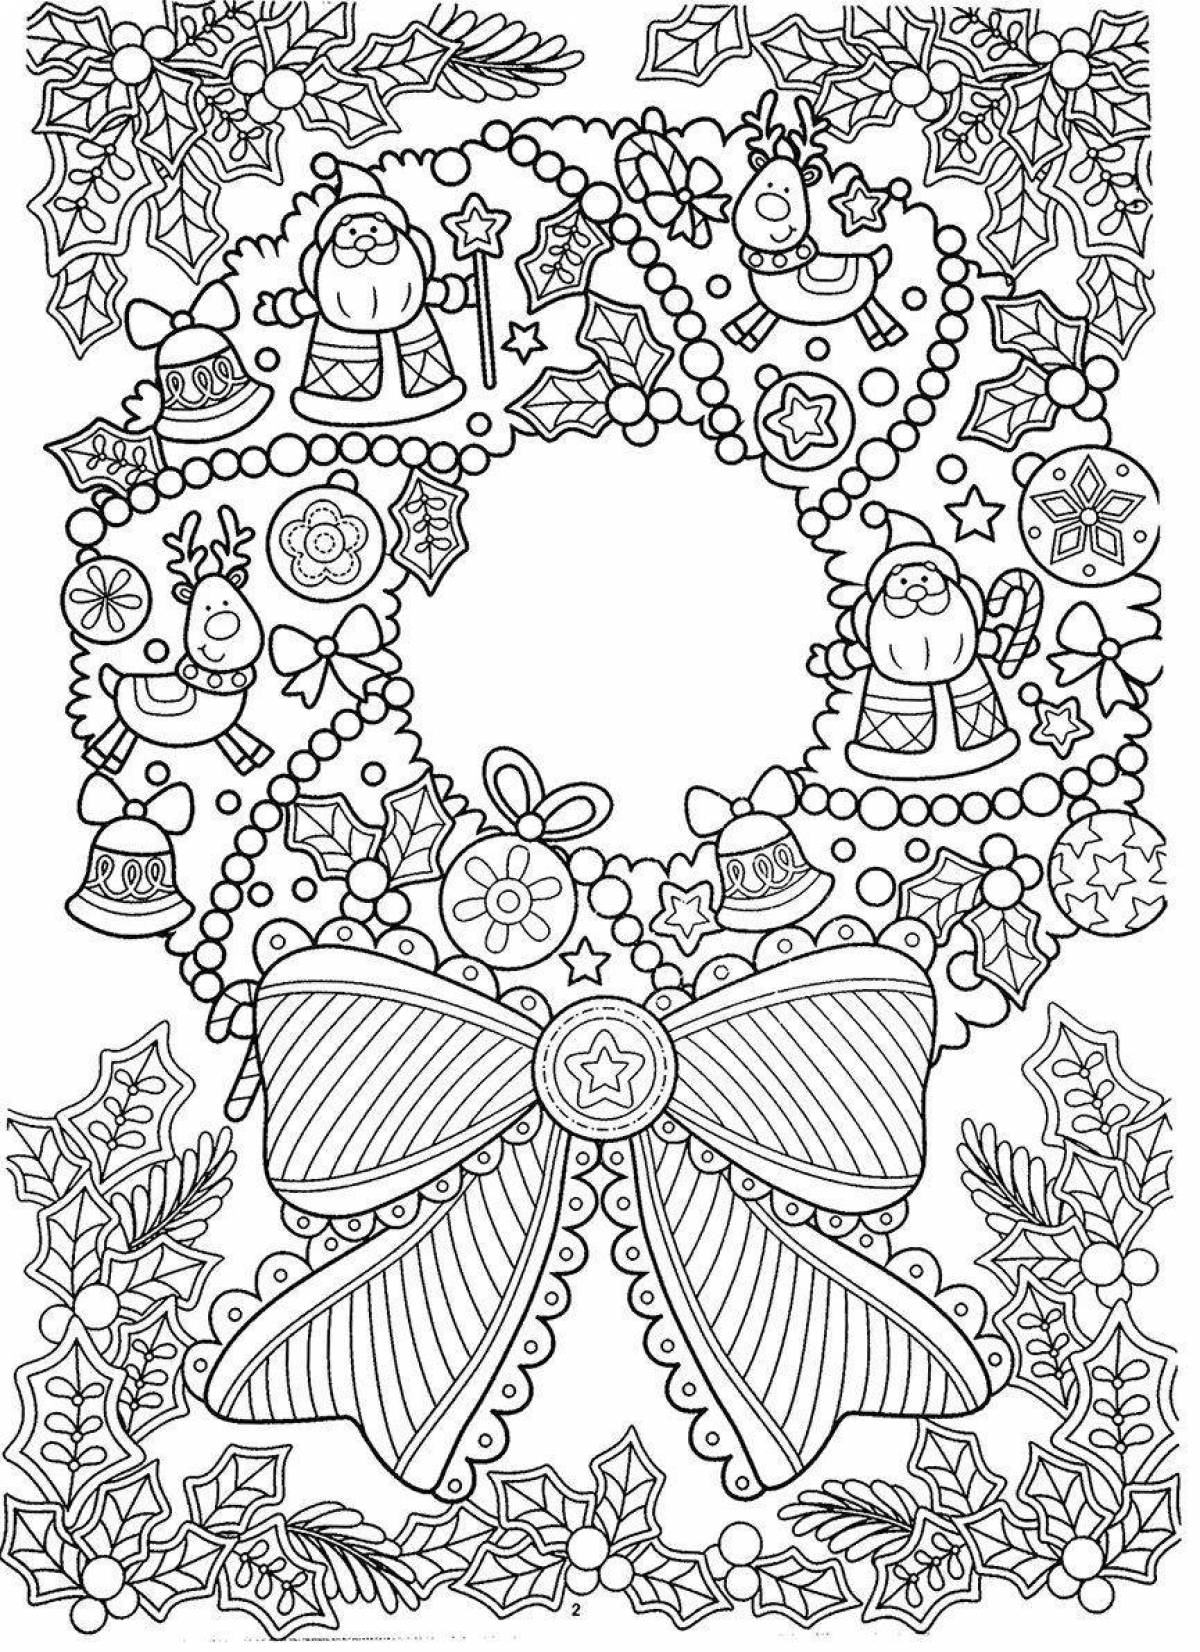 Blissful coloring antistress christmas